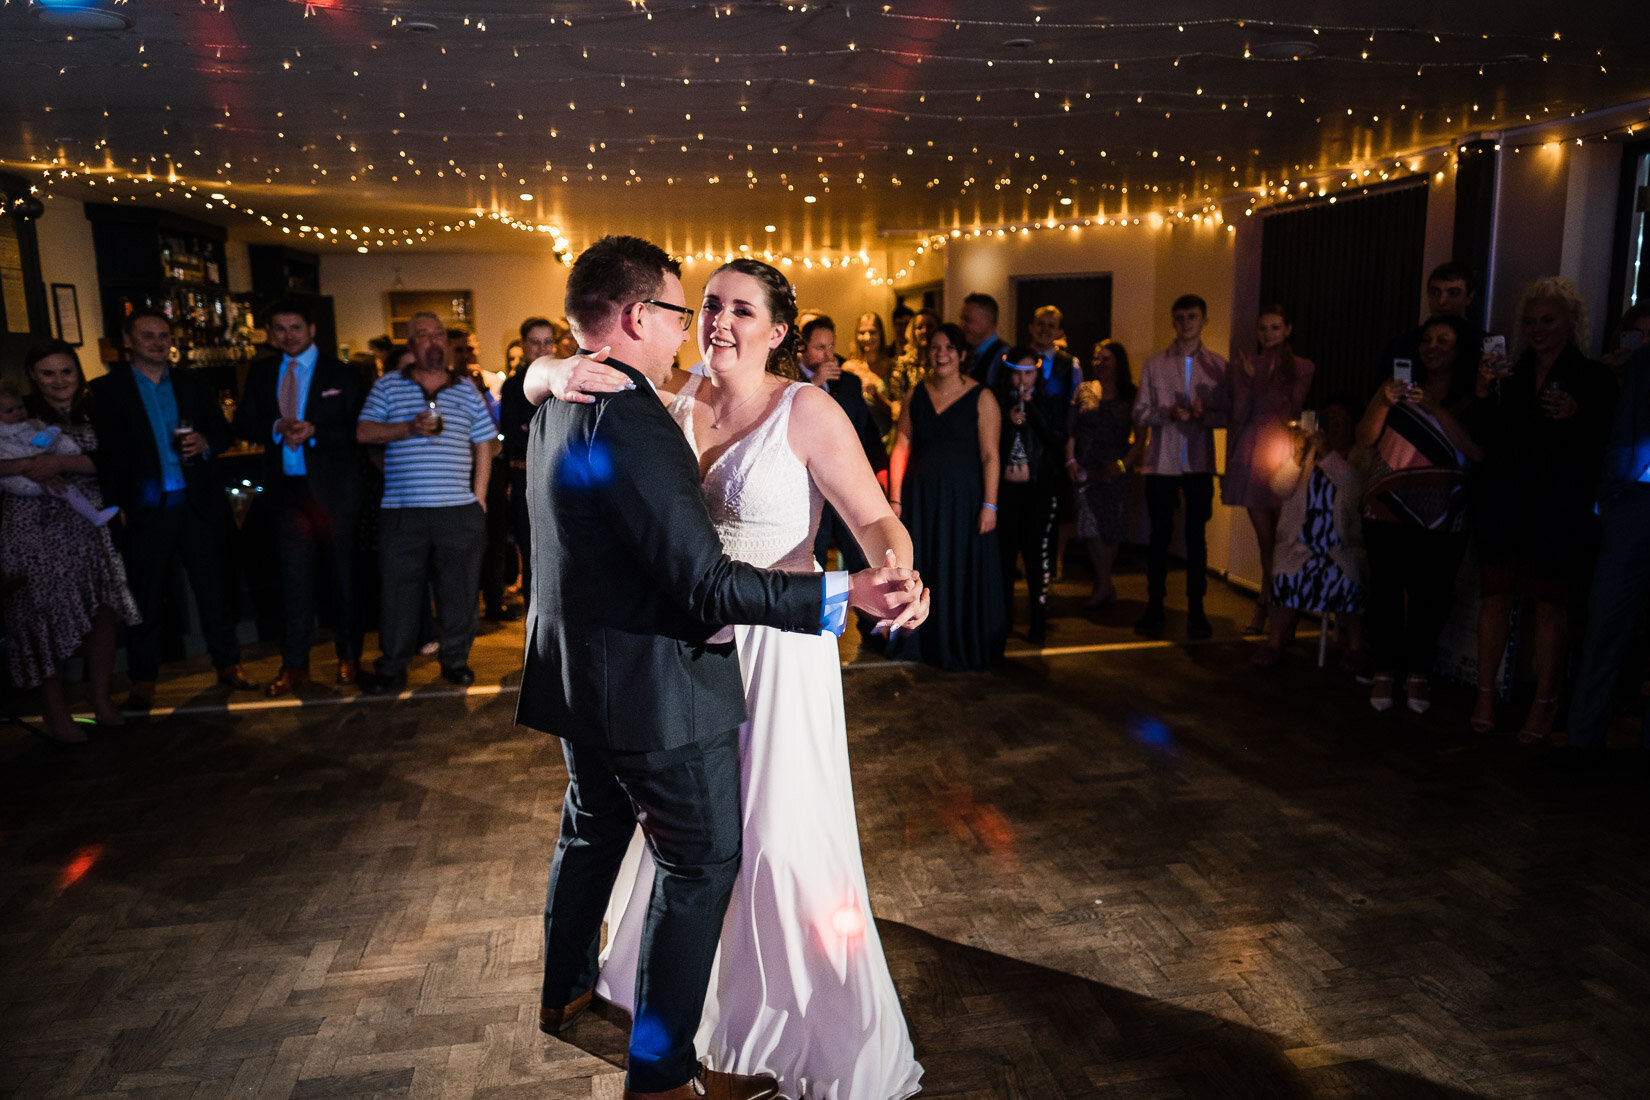  The Cotswolds Hotel and Spa wedding of Daisy and Luke from March 2020 